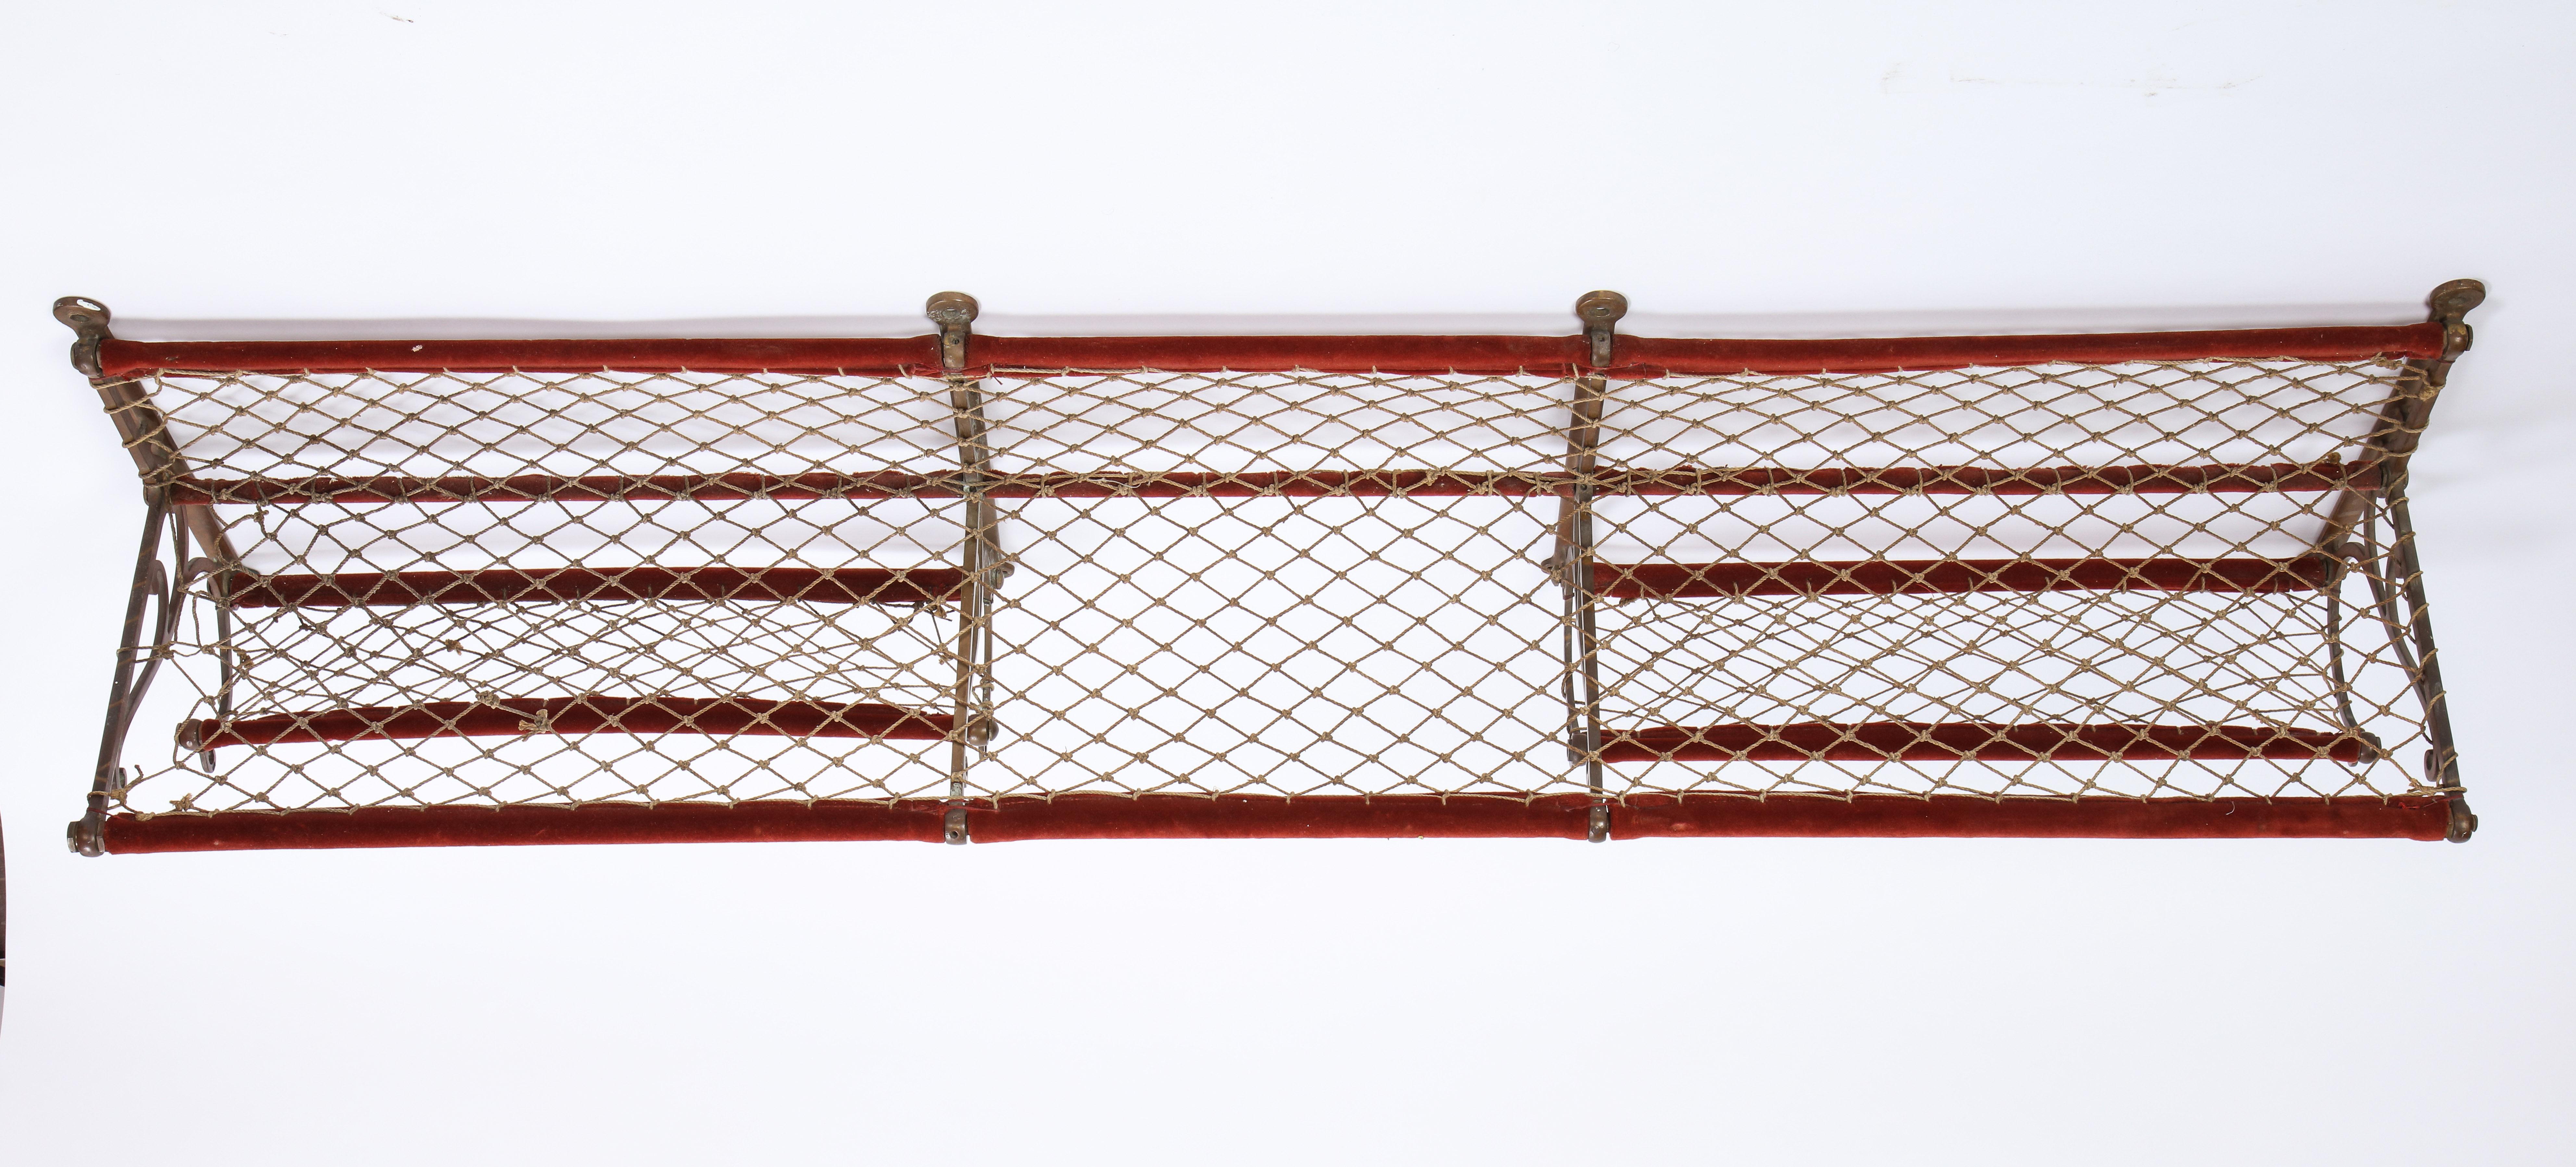 Metal, Plush and Netting Train Luggage Rack in Red, 20th Century For Sale 5